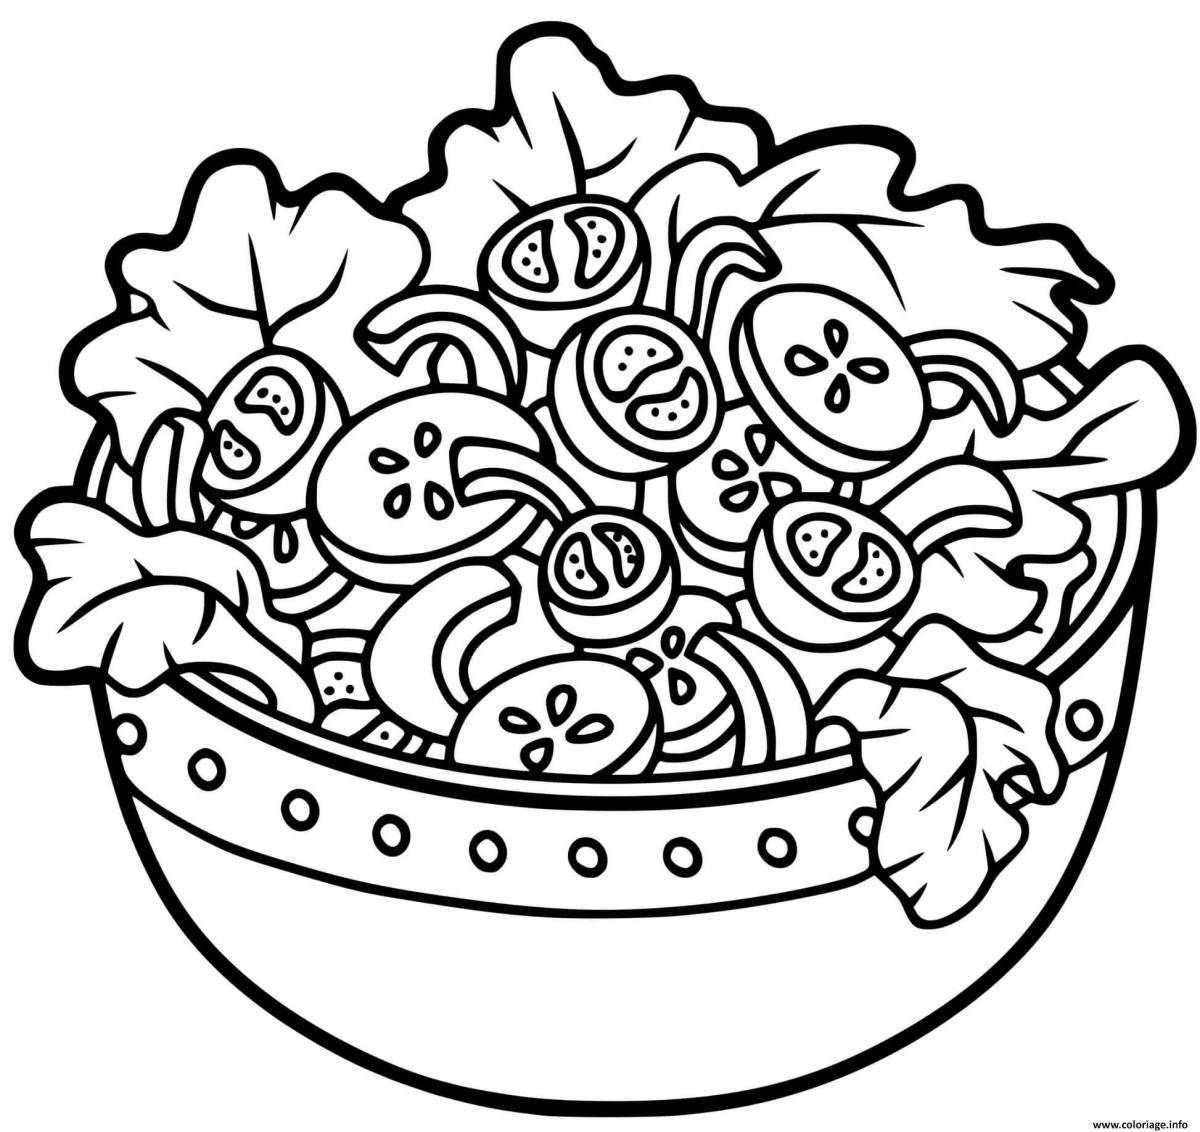 Fresh vegetable salad coloring page